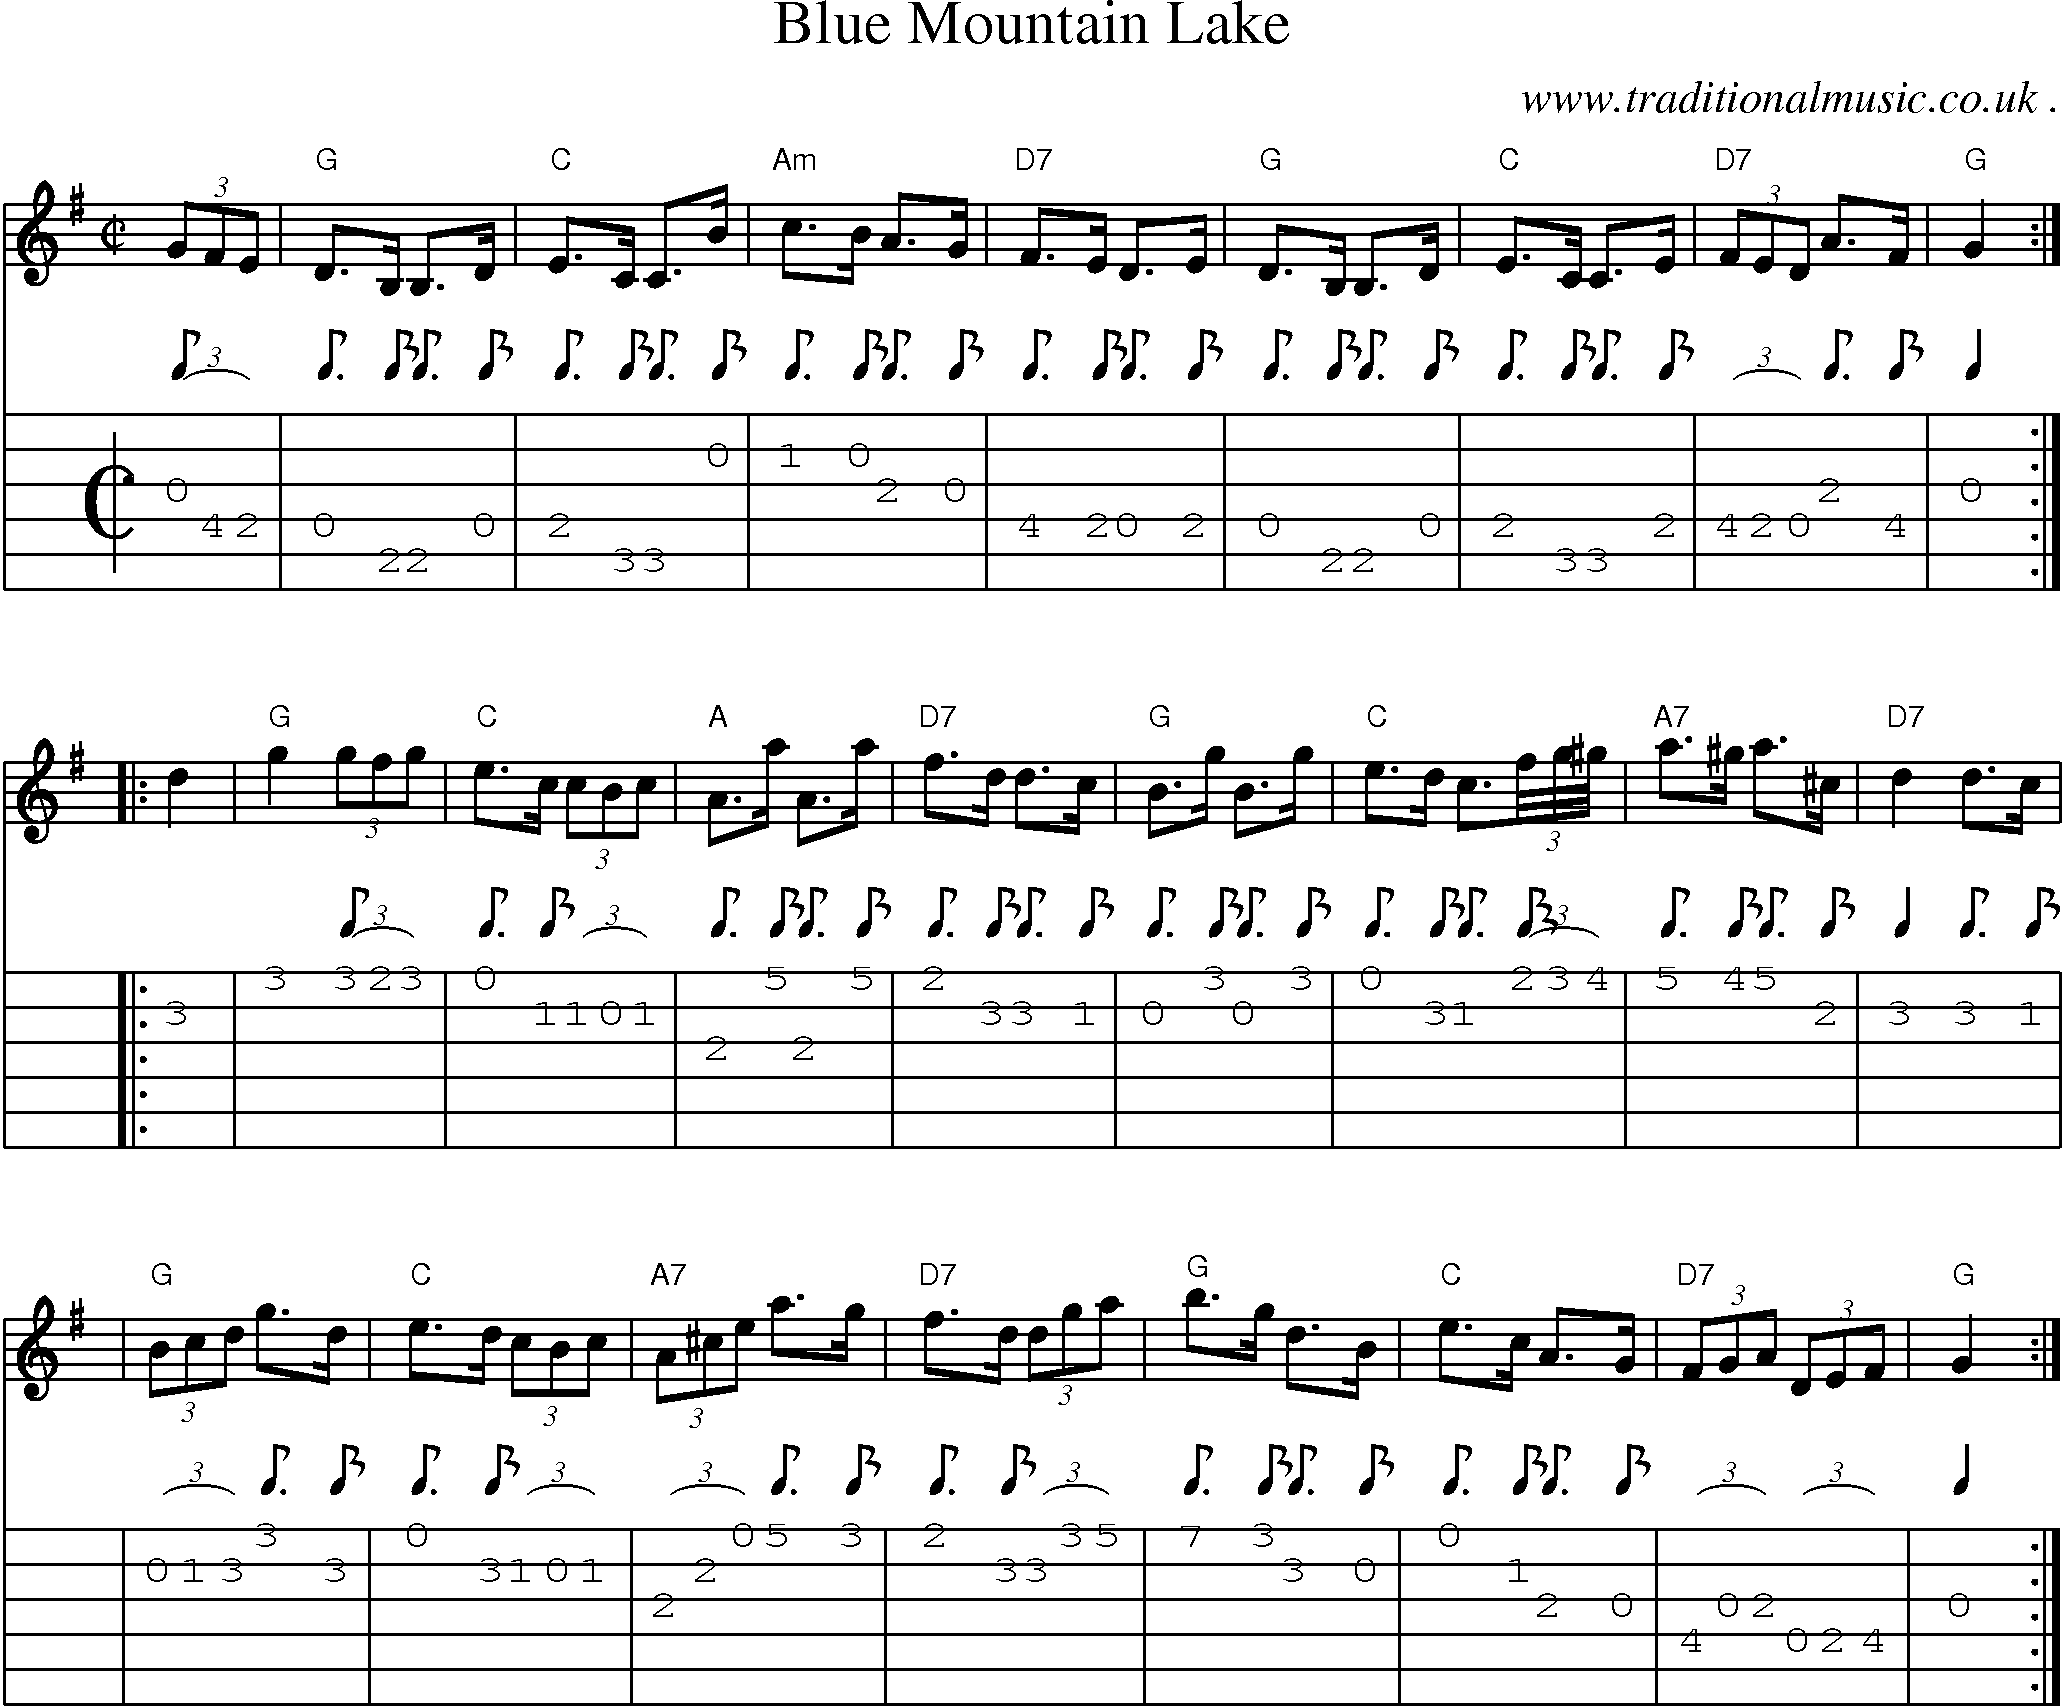 Music Score and Guitar Tabs for Blue Mountain Lake